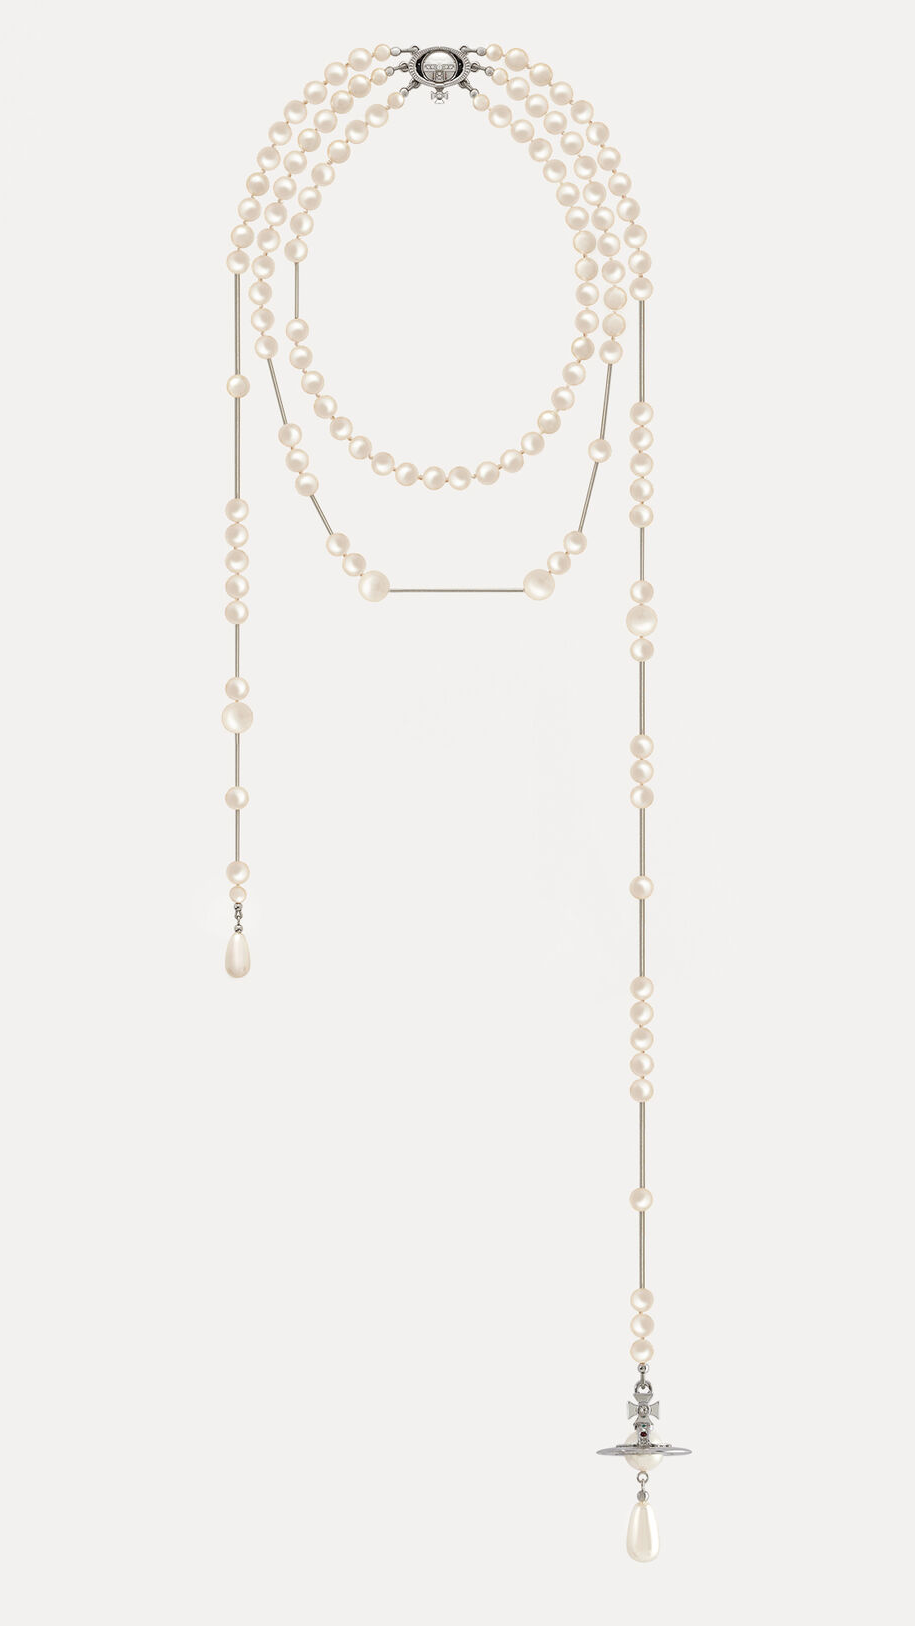 Premium Photo | Broken necklace with pearls on a mannequin hand - isolated